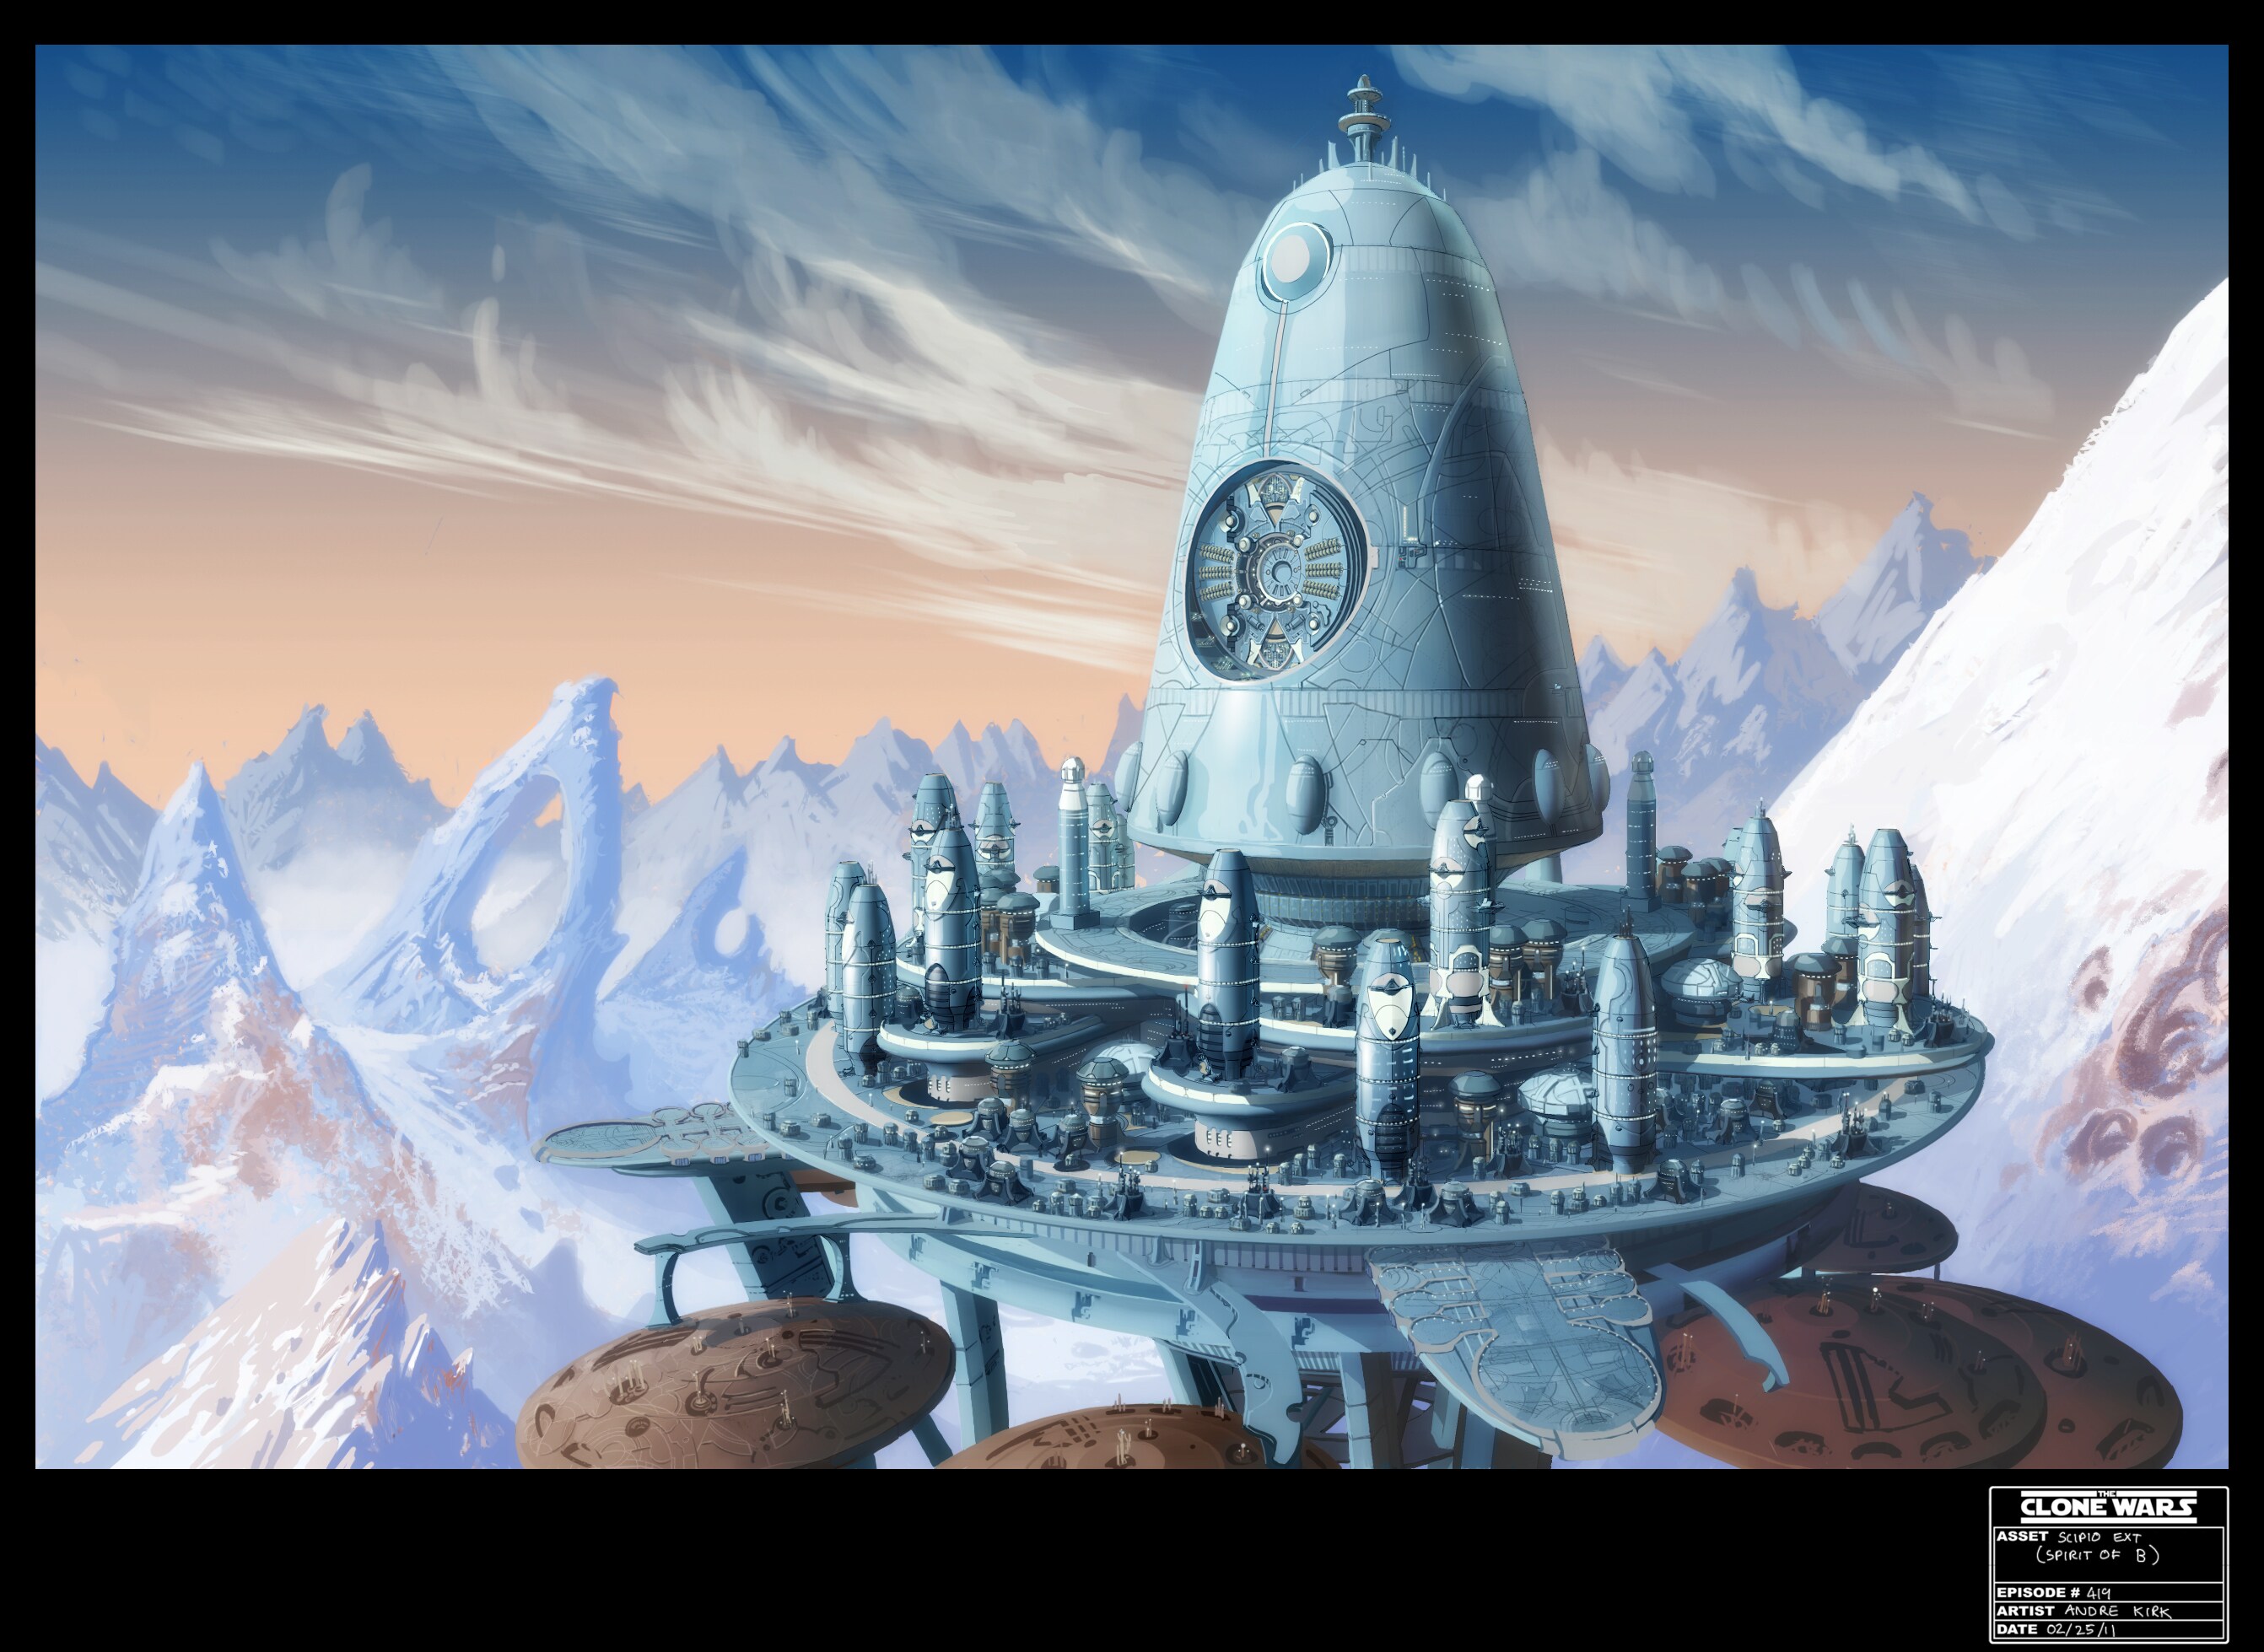 Scipio exterior illustration by Andre Kirk (dated February 25, 2011).